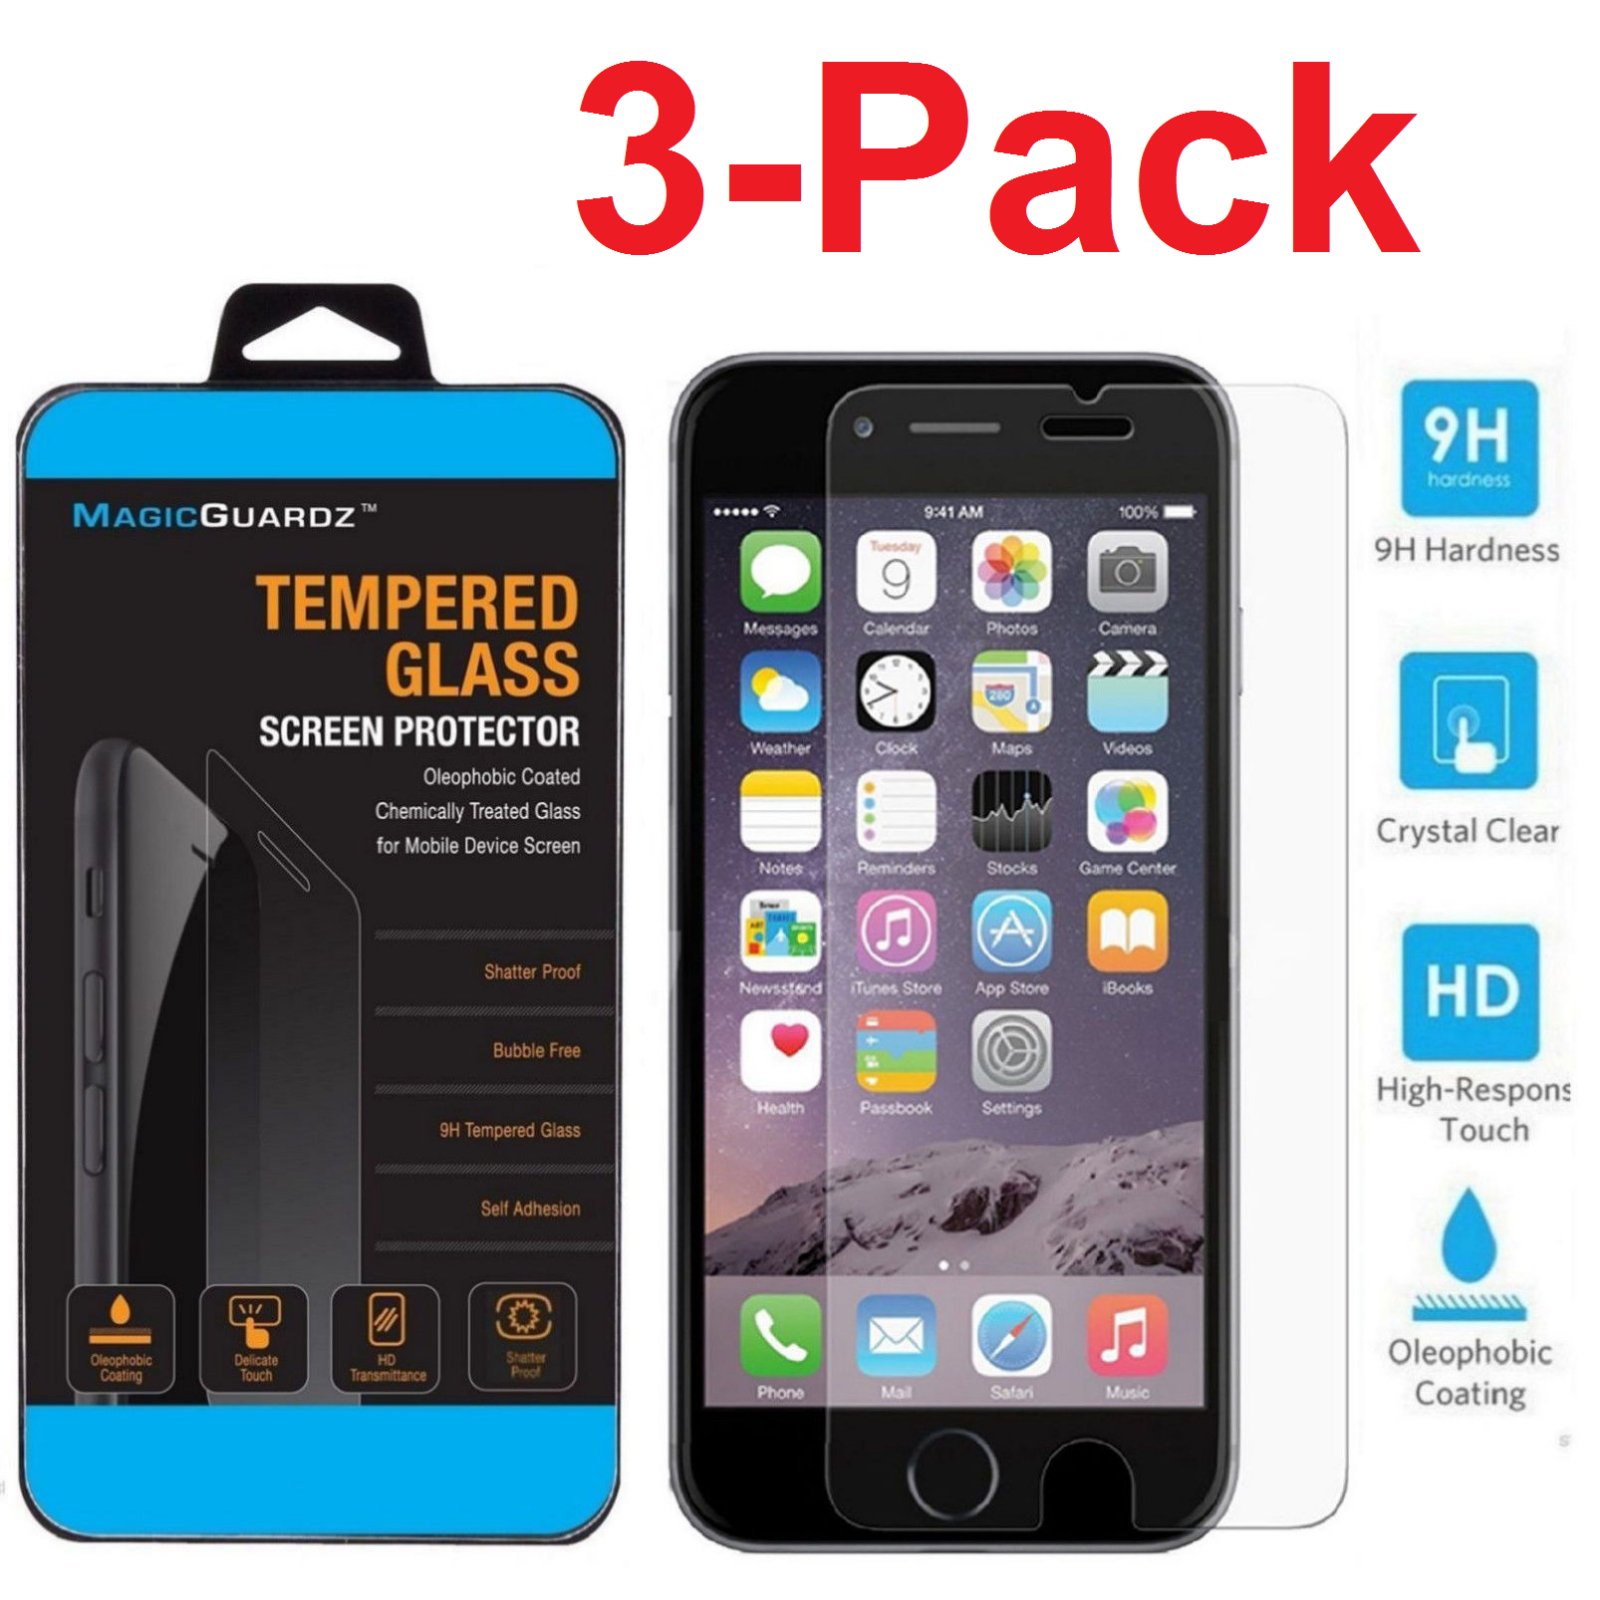 iPhone 6 (3-Pack)